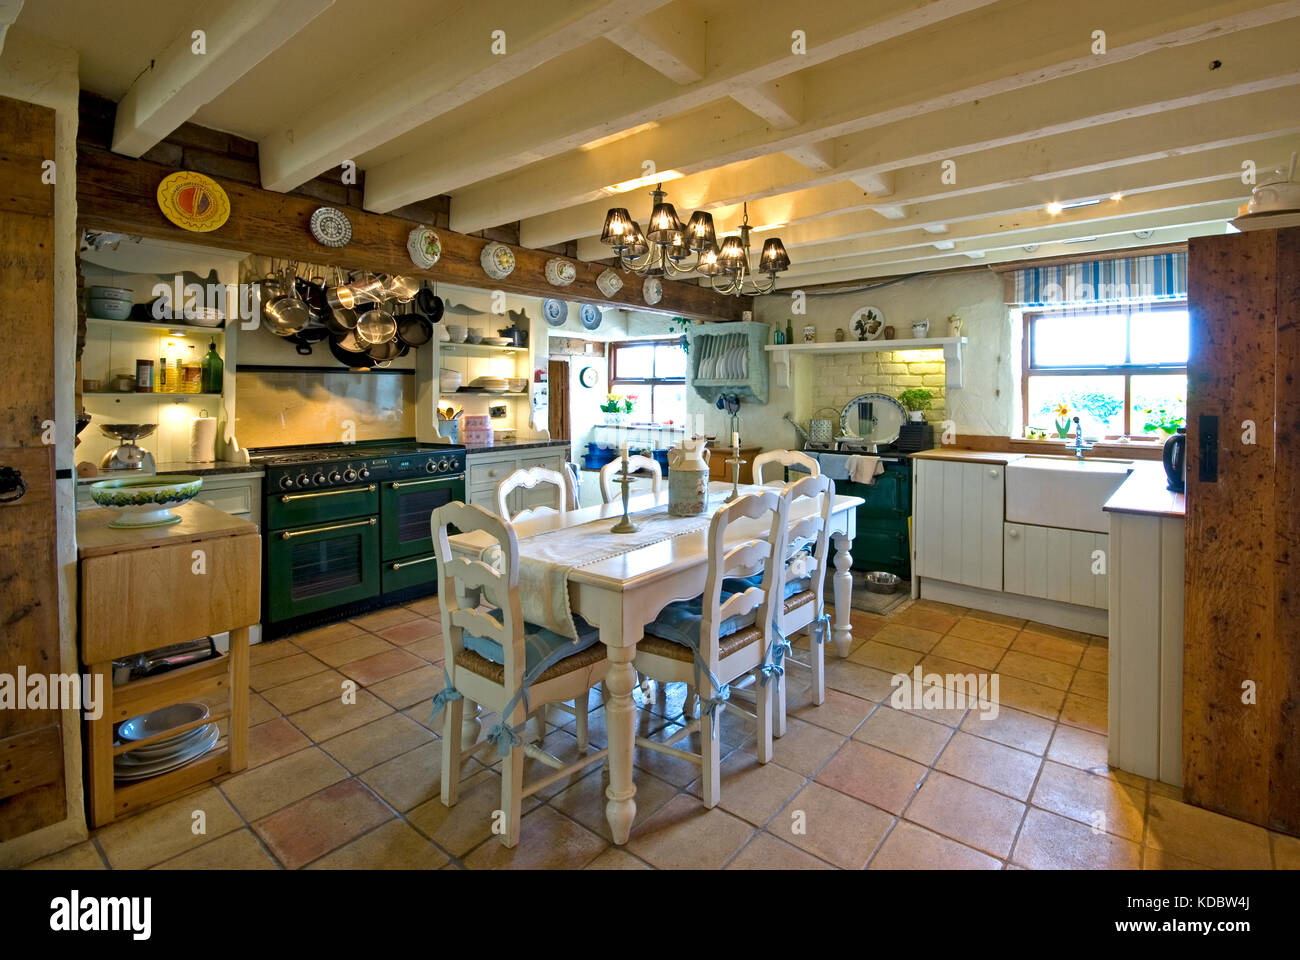 Farmhouse dining kitchen with green range cooker Stock Photo